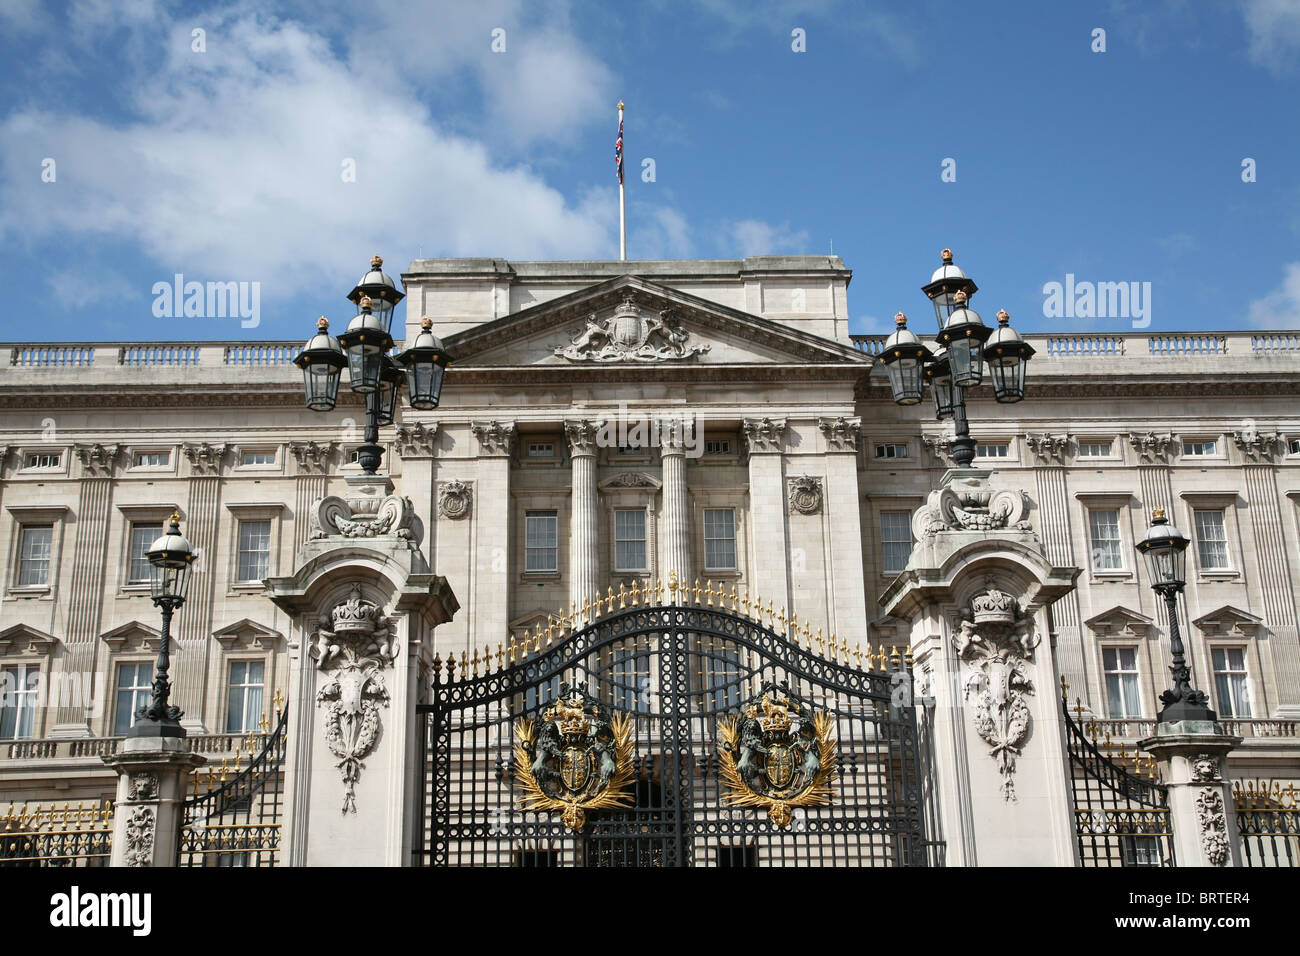 Buckingham Palace Front, and Gate with Royal Coat of Arms Stock Photo